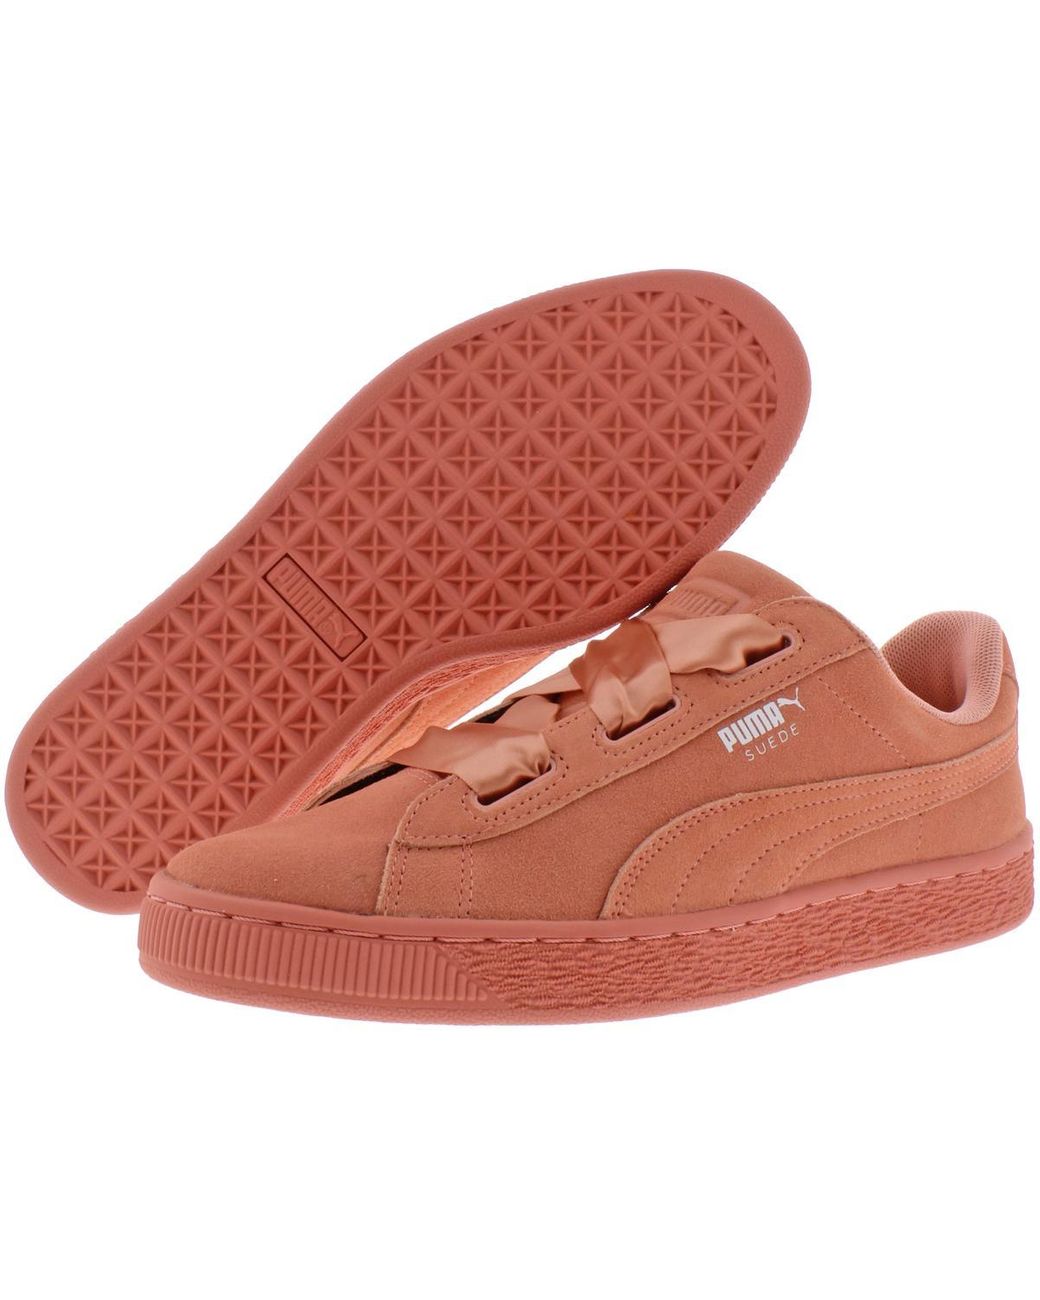 PUMA Suede Heart Jr Ake Suede Fashion Sneakers in Red | Lyst